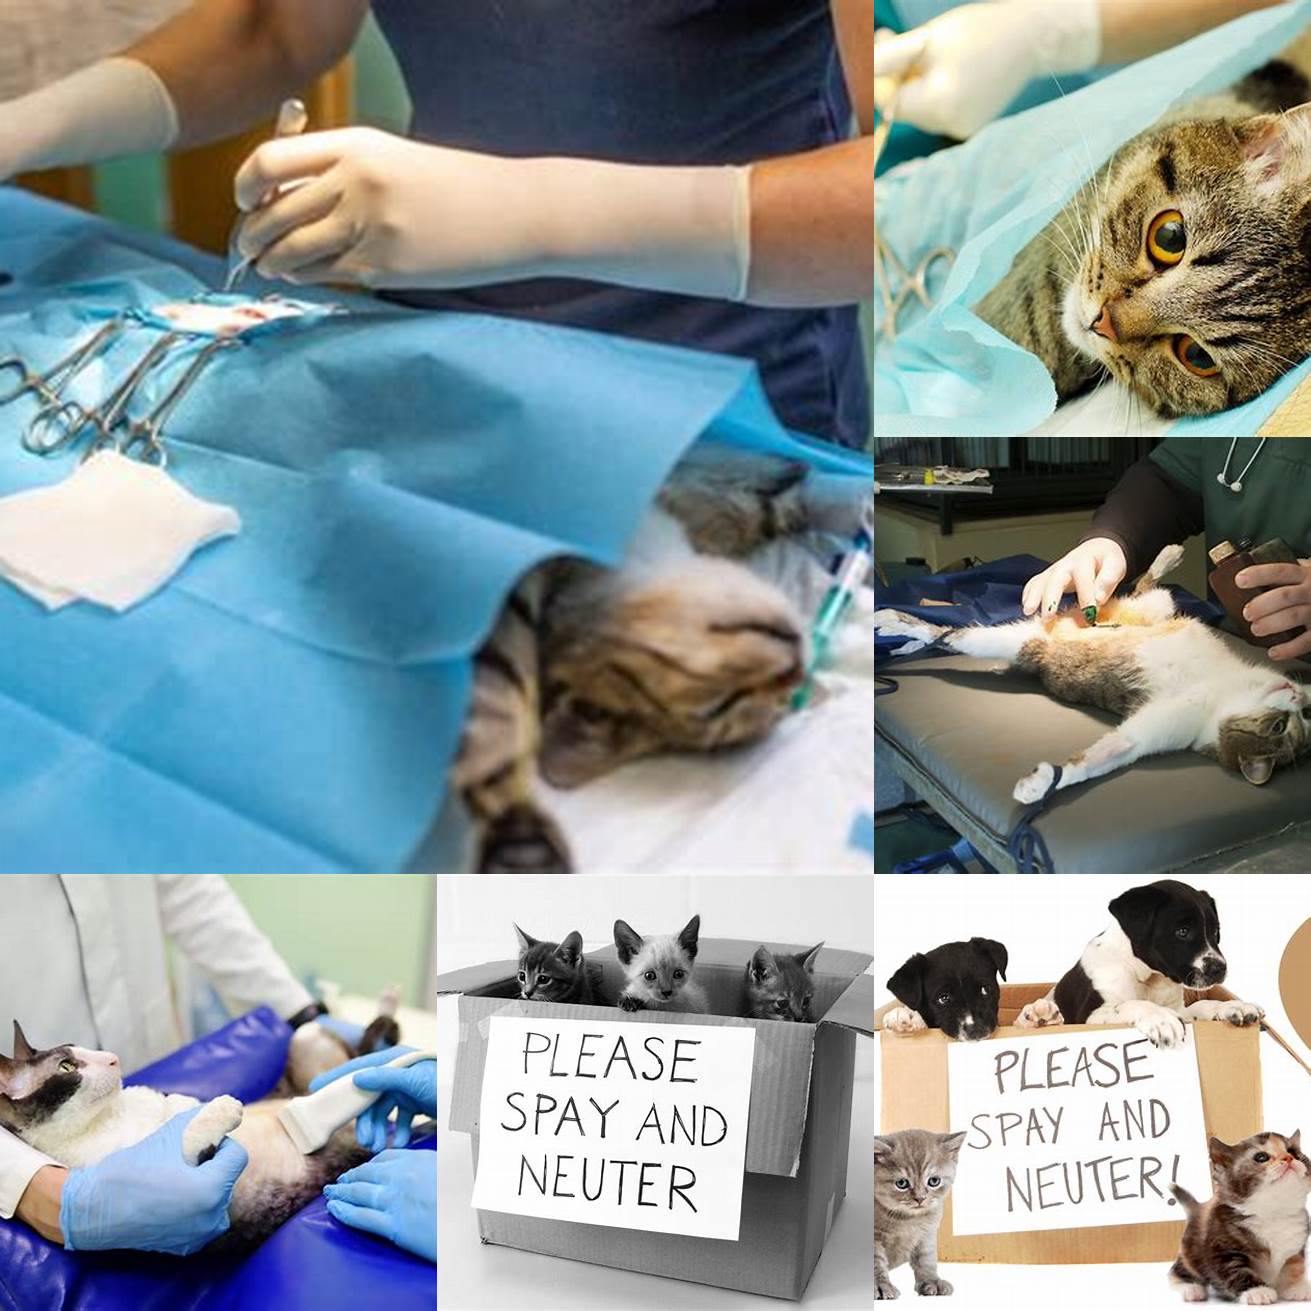 Spaying or neutering your cat